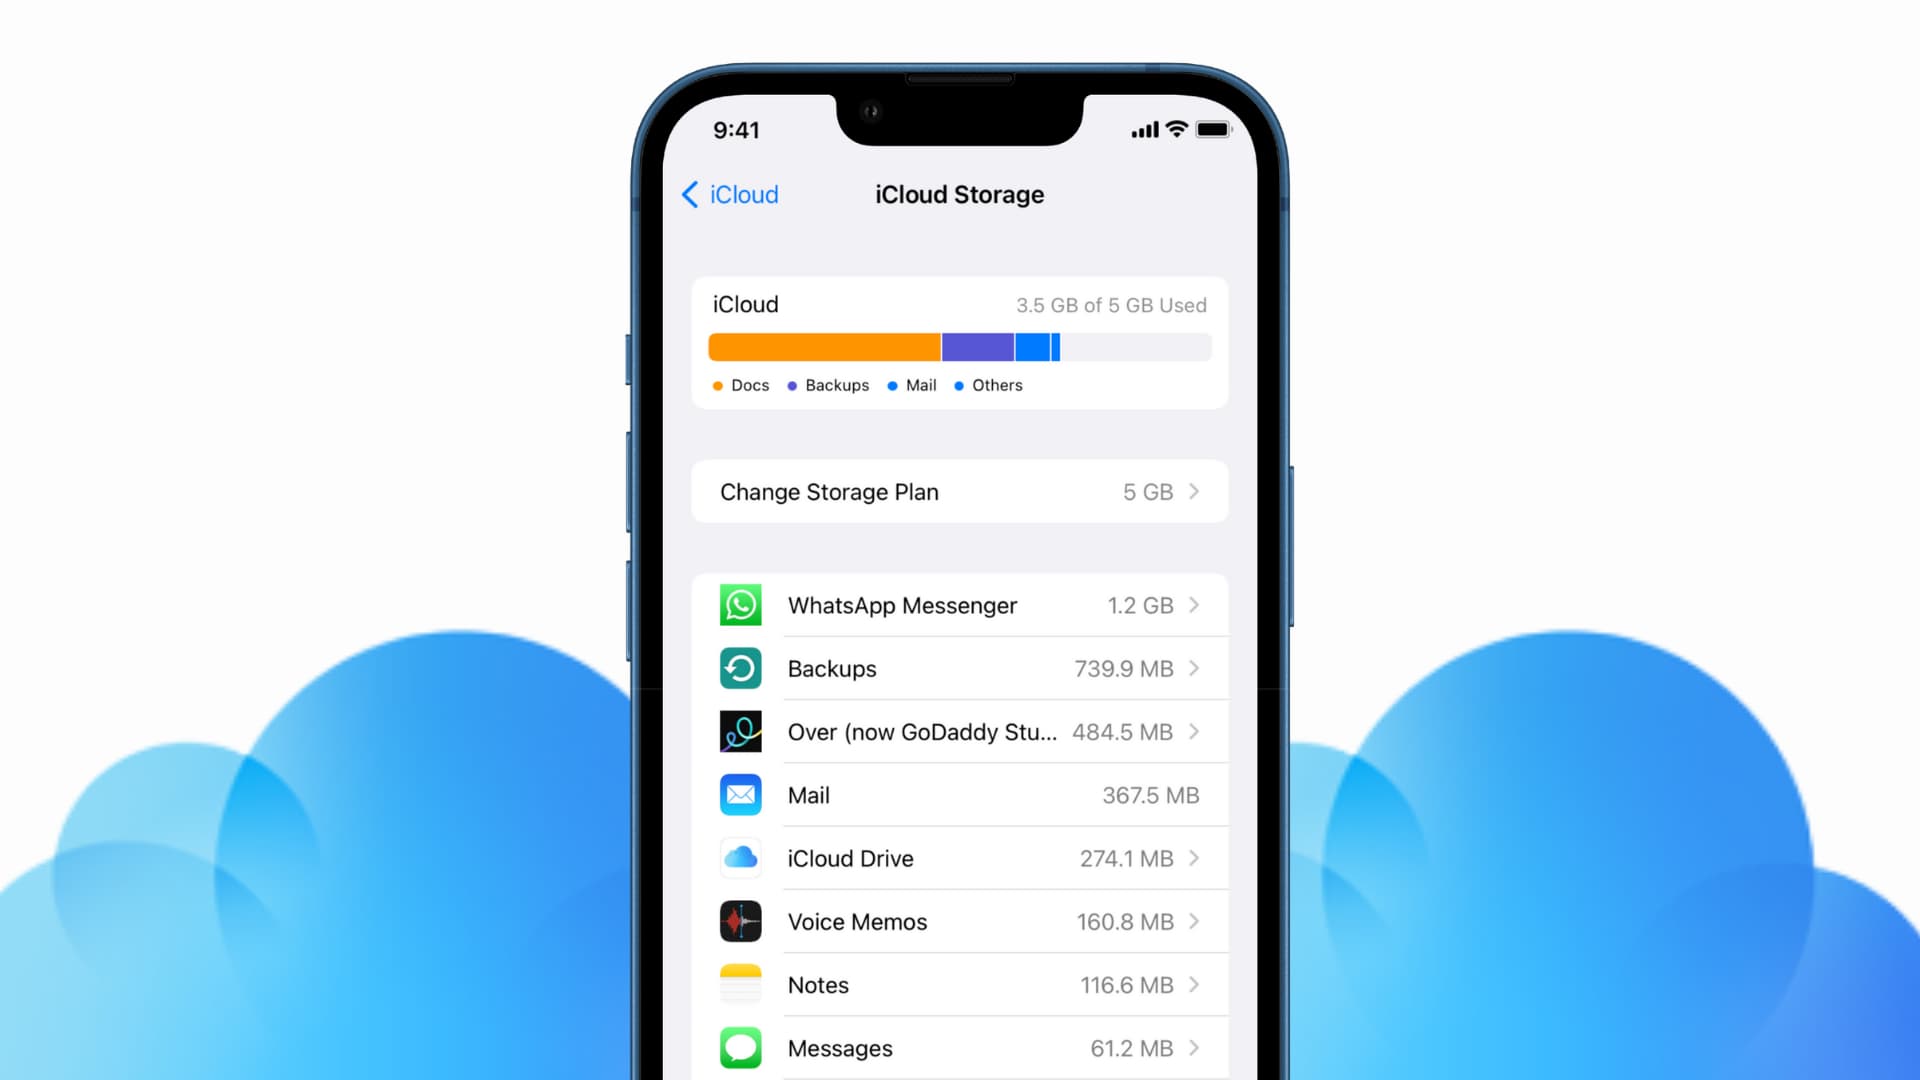 apples-5gb-of-icloud-storage-is-low-buying-more-worth-it